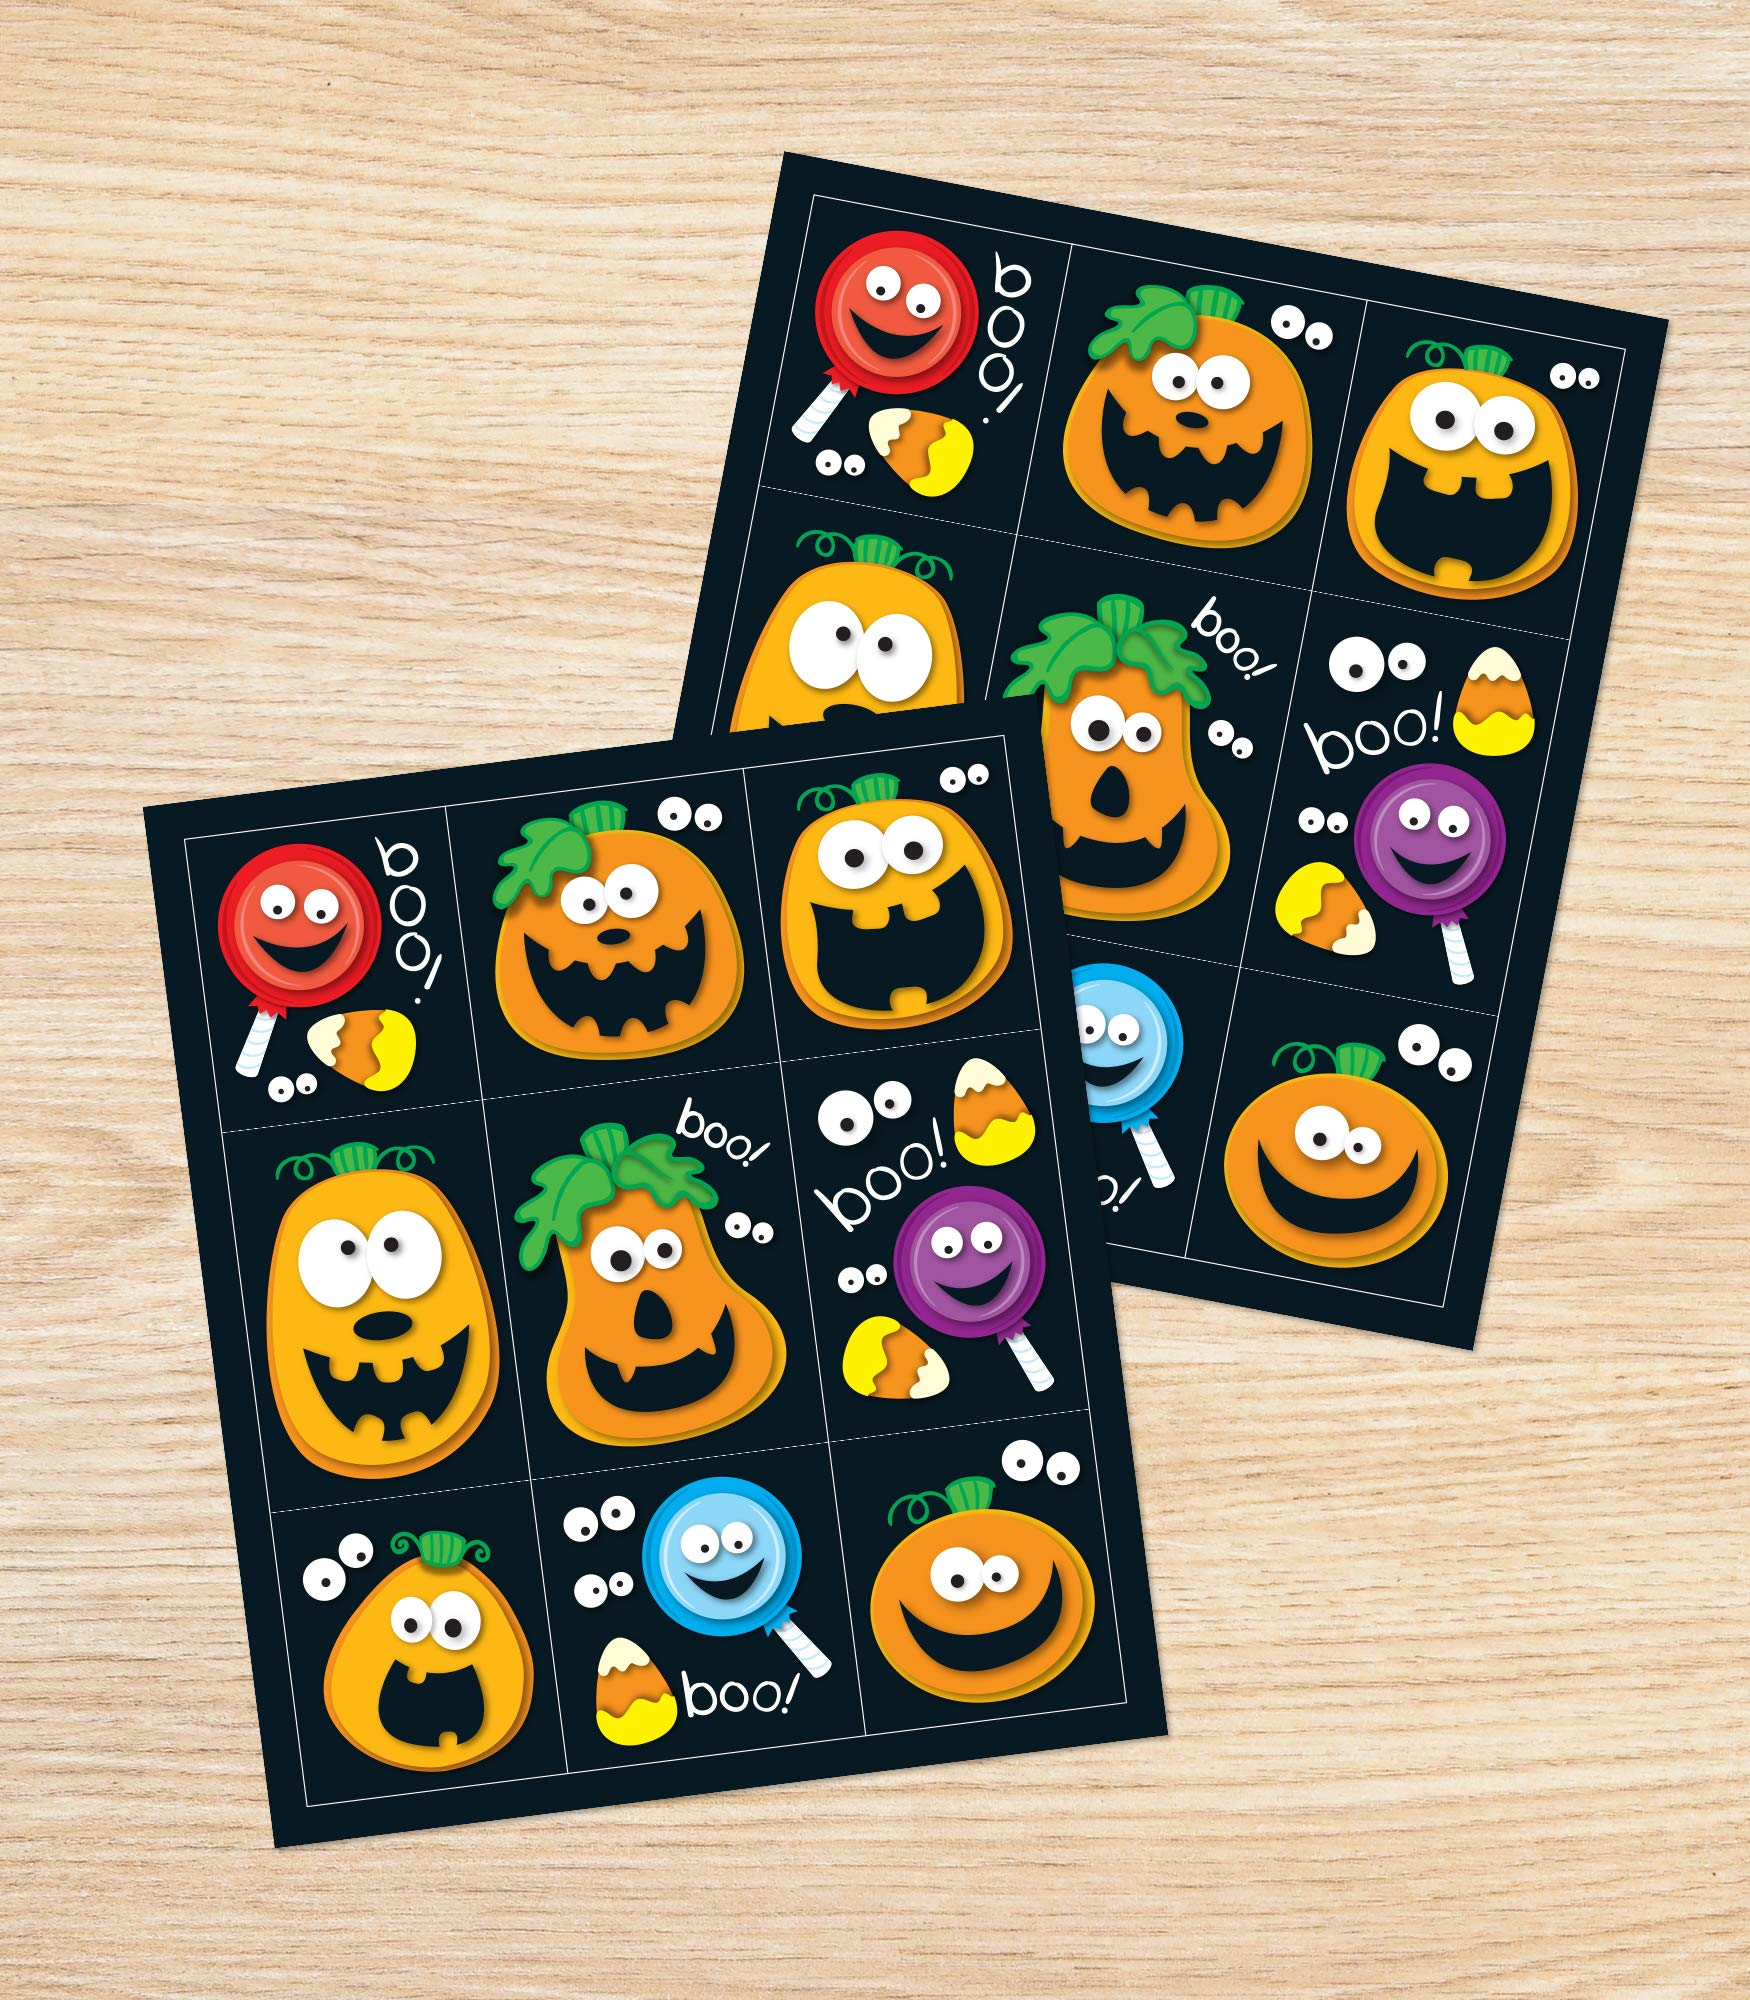 Carson Dellosa Halloween Stickers for Kids Sheet Set, 216 Stickers - 24 Sheets of Halloween Stickers for Homework, Tests, Assignments, & Rewards, Great Motivational Aid for Classroom or Homeschool